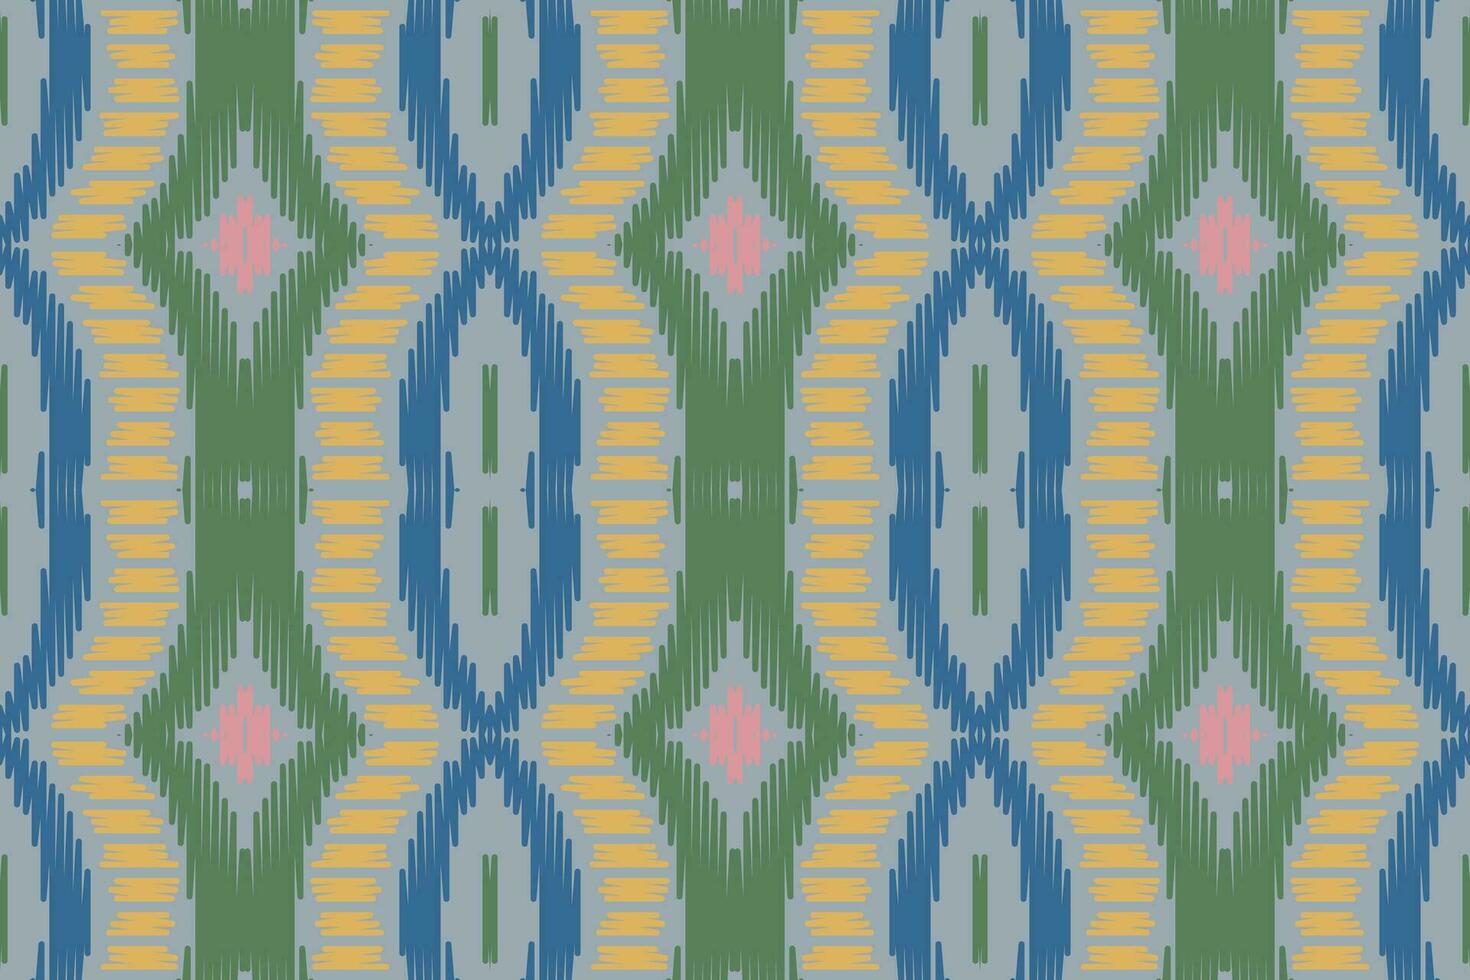 Motif Ikat Seamless Pattern Embroidery Background. Ikat Print Geometric Ethnic Oriental Pattern traditional.aztec Style Abstract Vector design for Texture,fabric,clothing,wrapping,sarong.